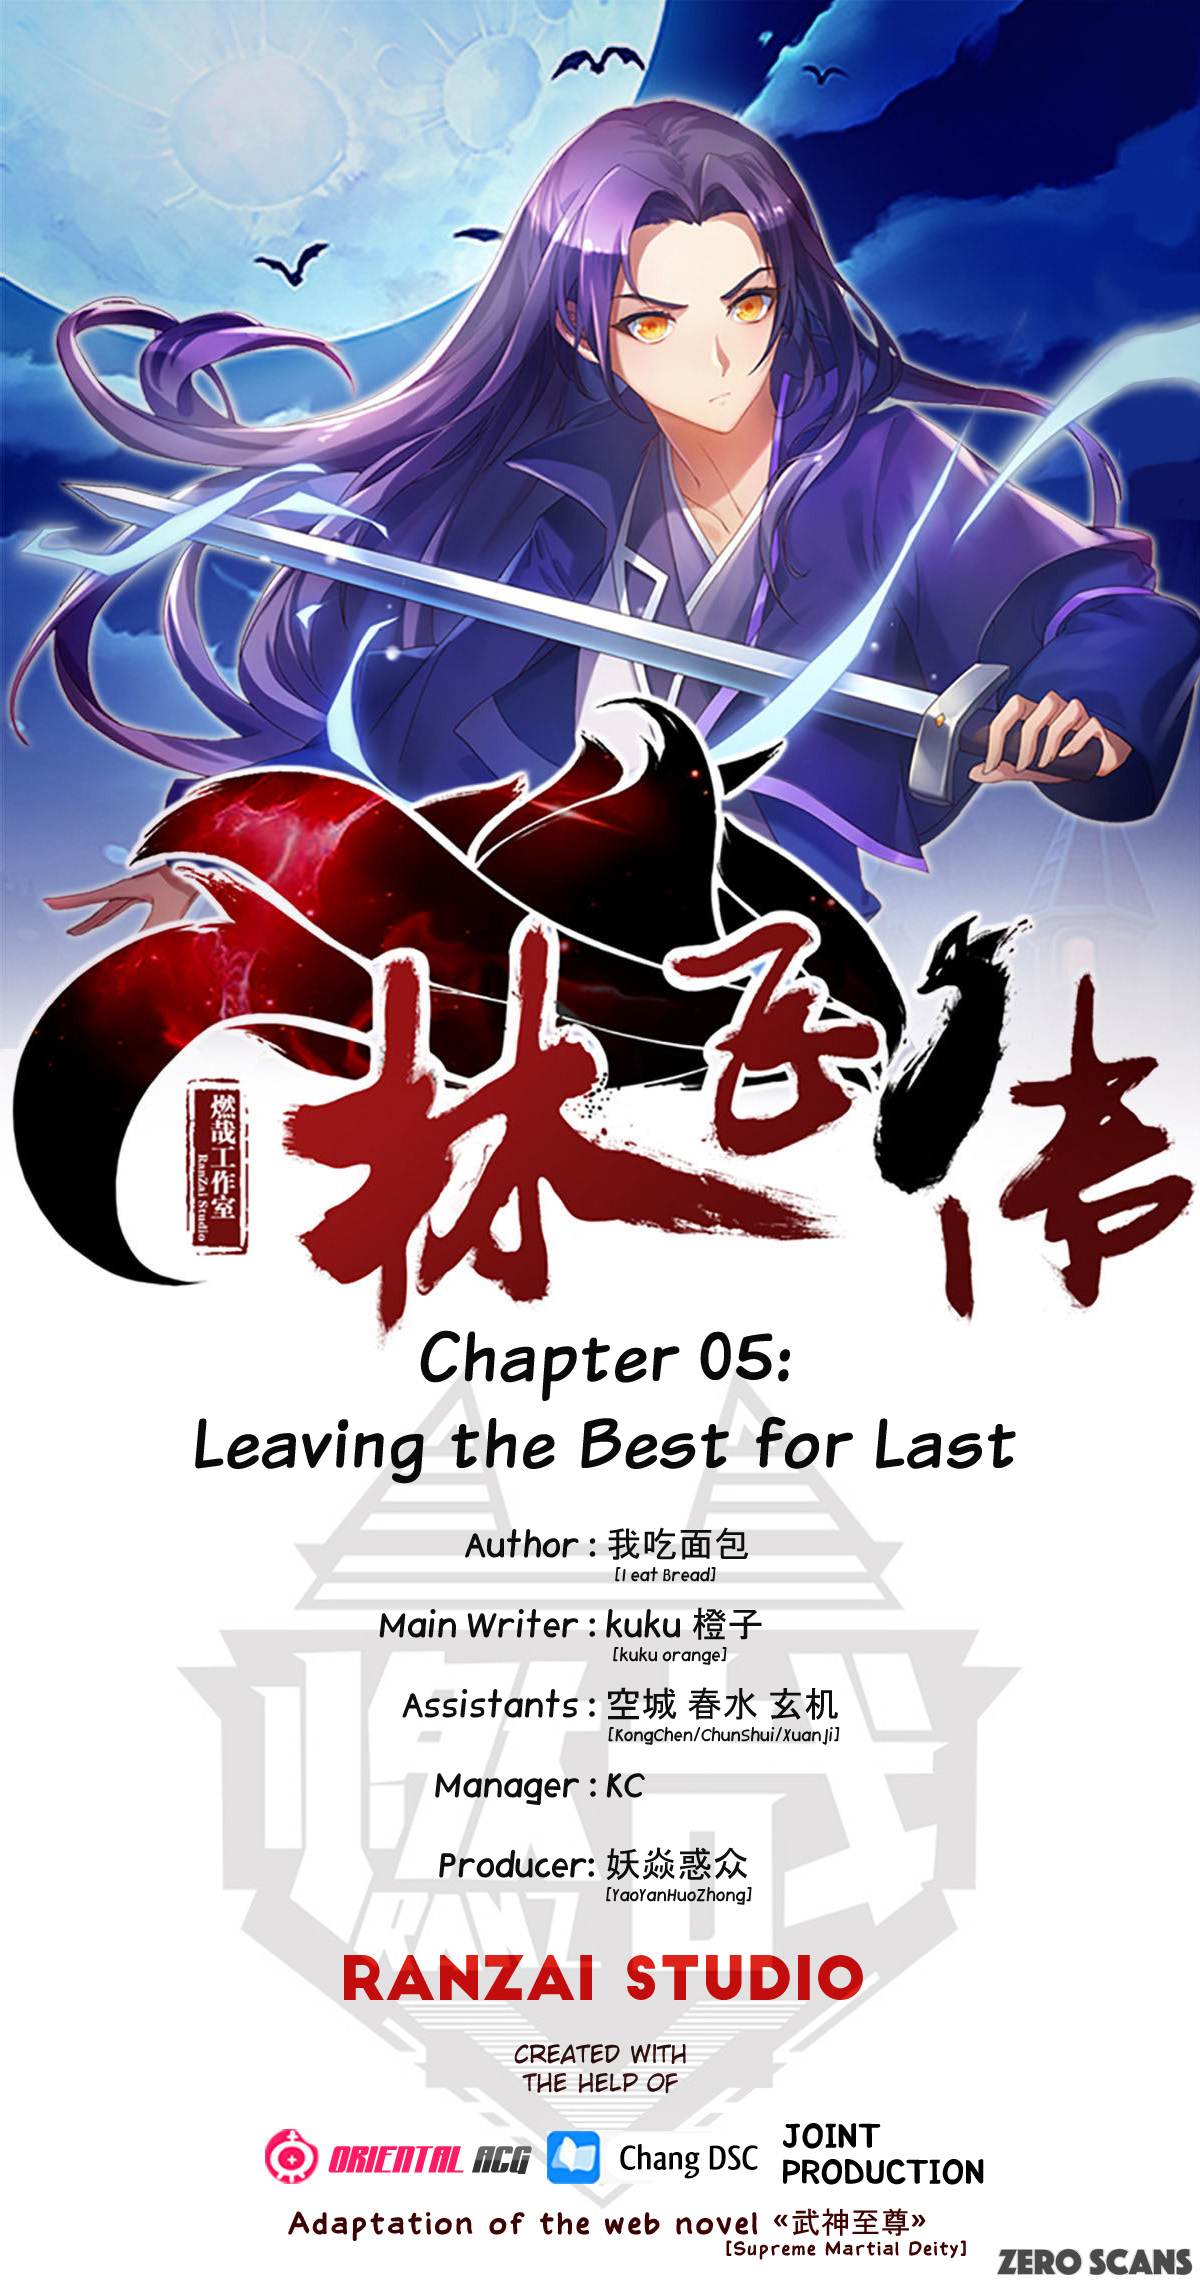 Lin Fei Chronicles Ch. 5 Leaving the Best for Last